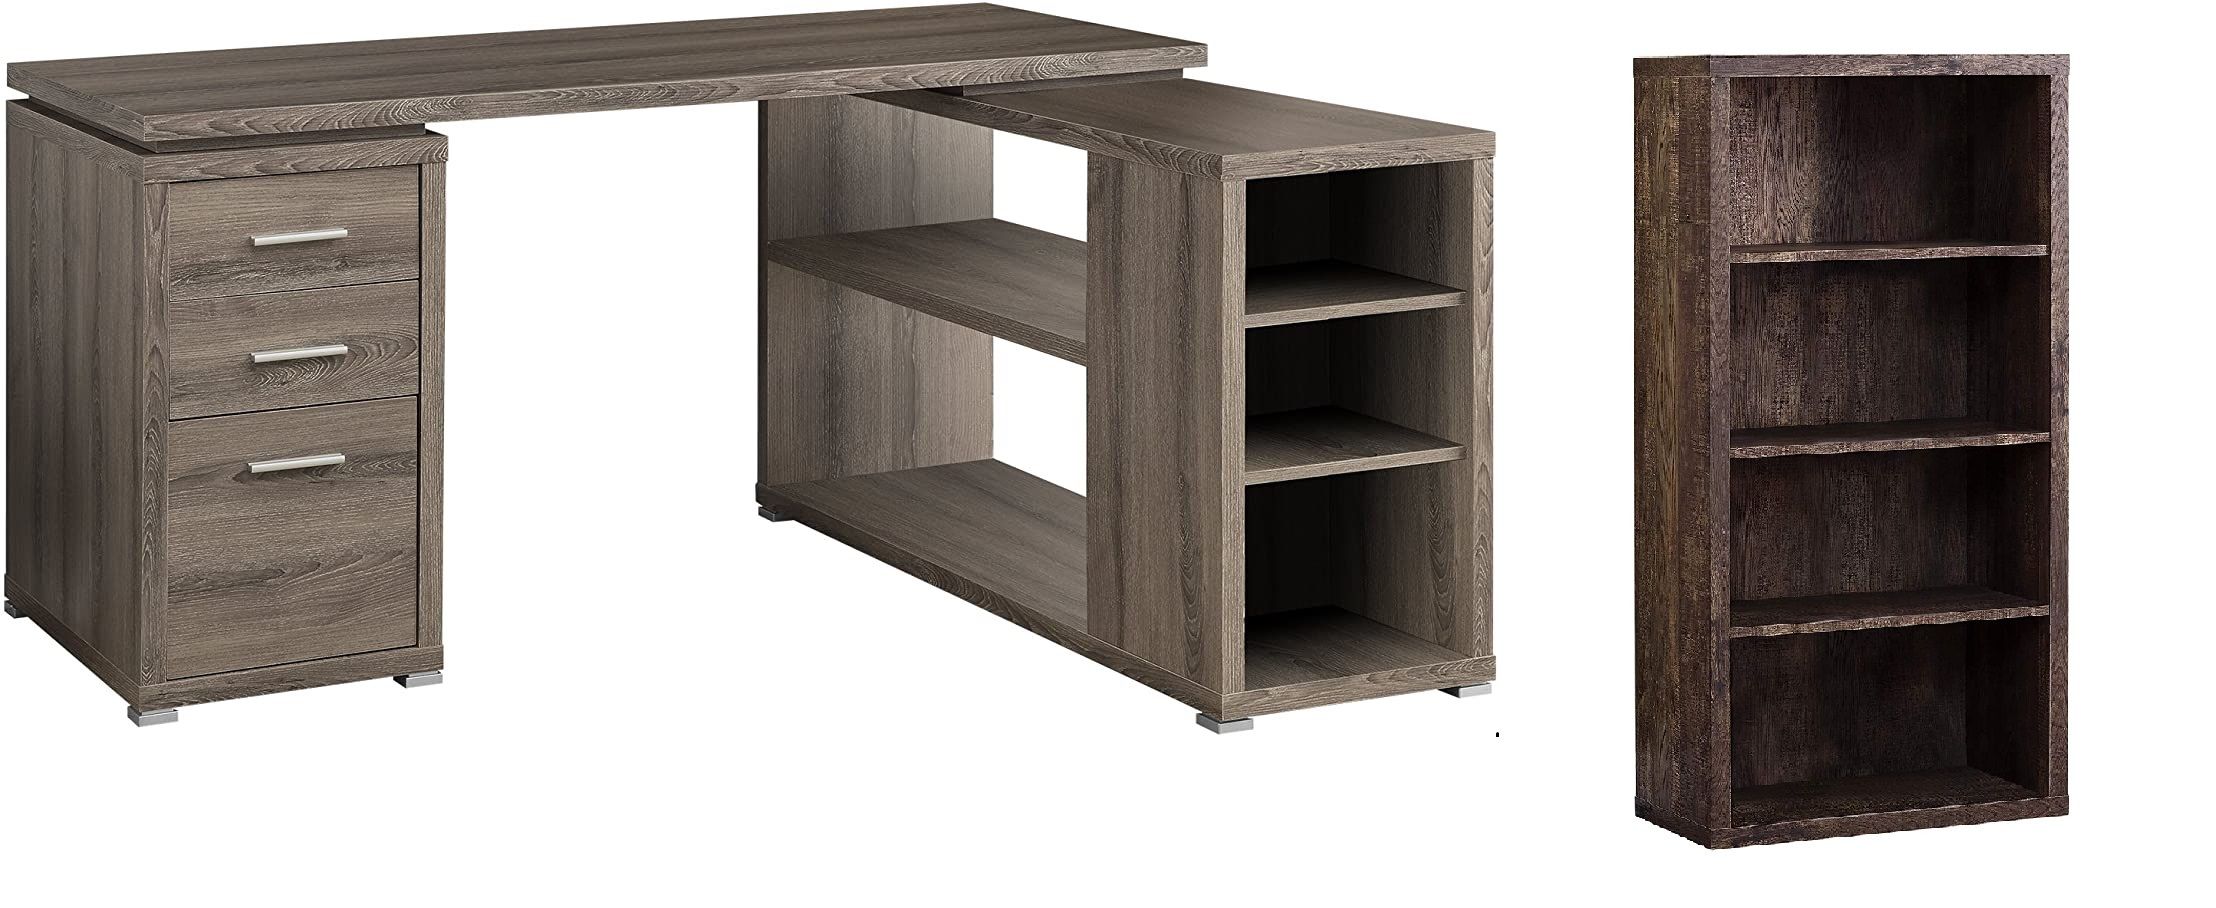 Monarch Specialties Hollow Core Left Or Right Facing Corner Desk, With With Left Facing Shelf Gray Modern Desks (View 15 of 15)